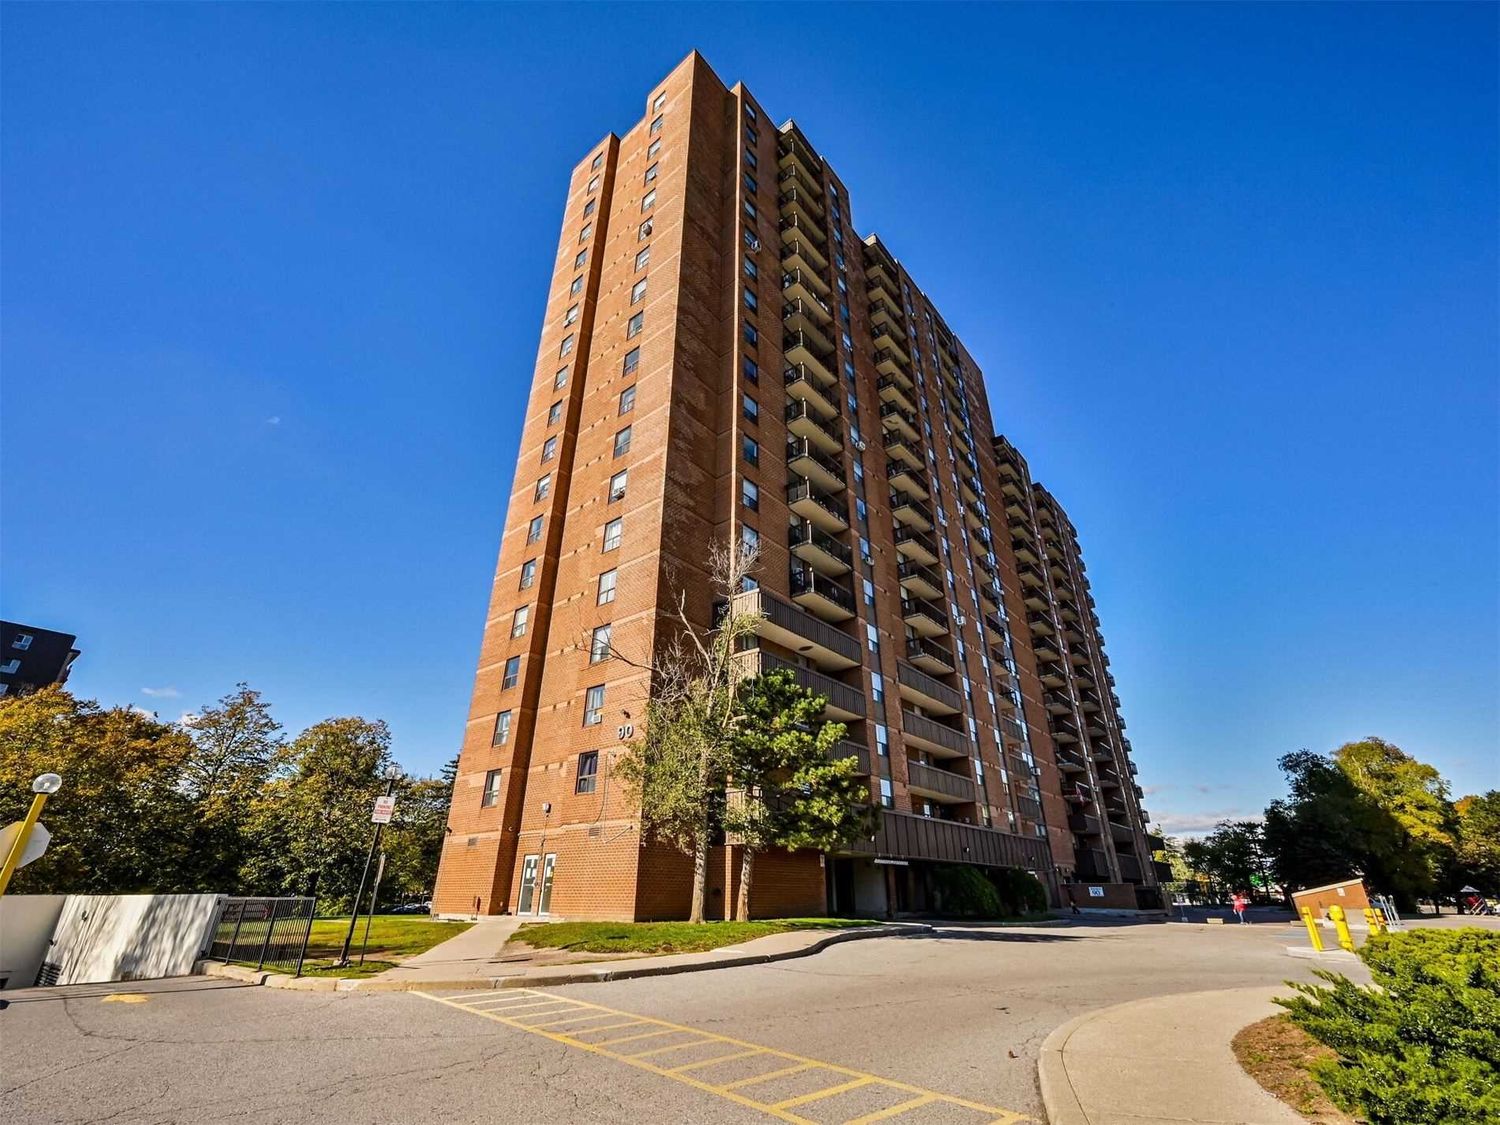 90 Ling Rd. This condo at Morningside Estates Condos is located in  Scarborough, Toronto - image #2 of 2 by Strata.ca